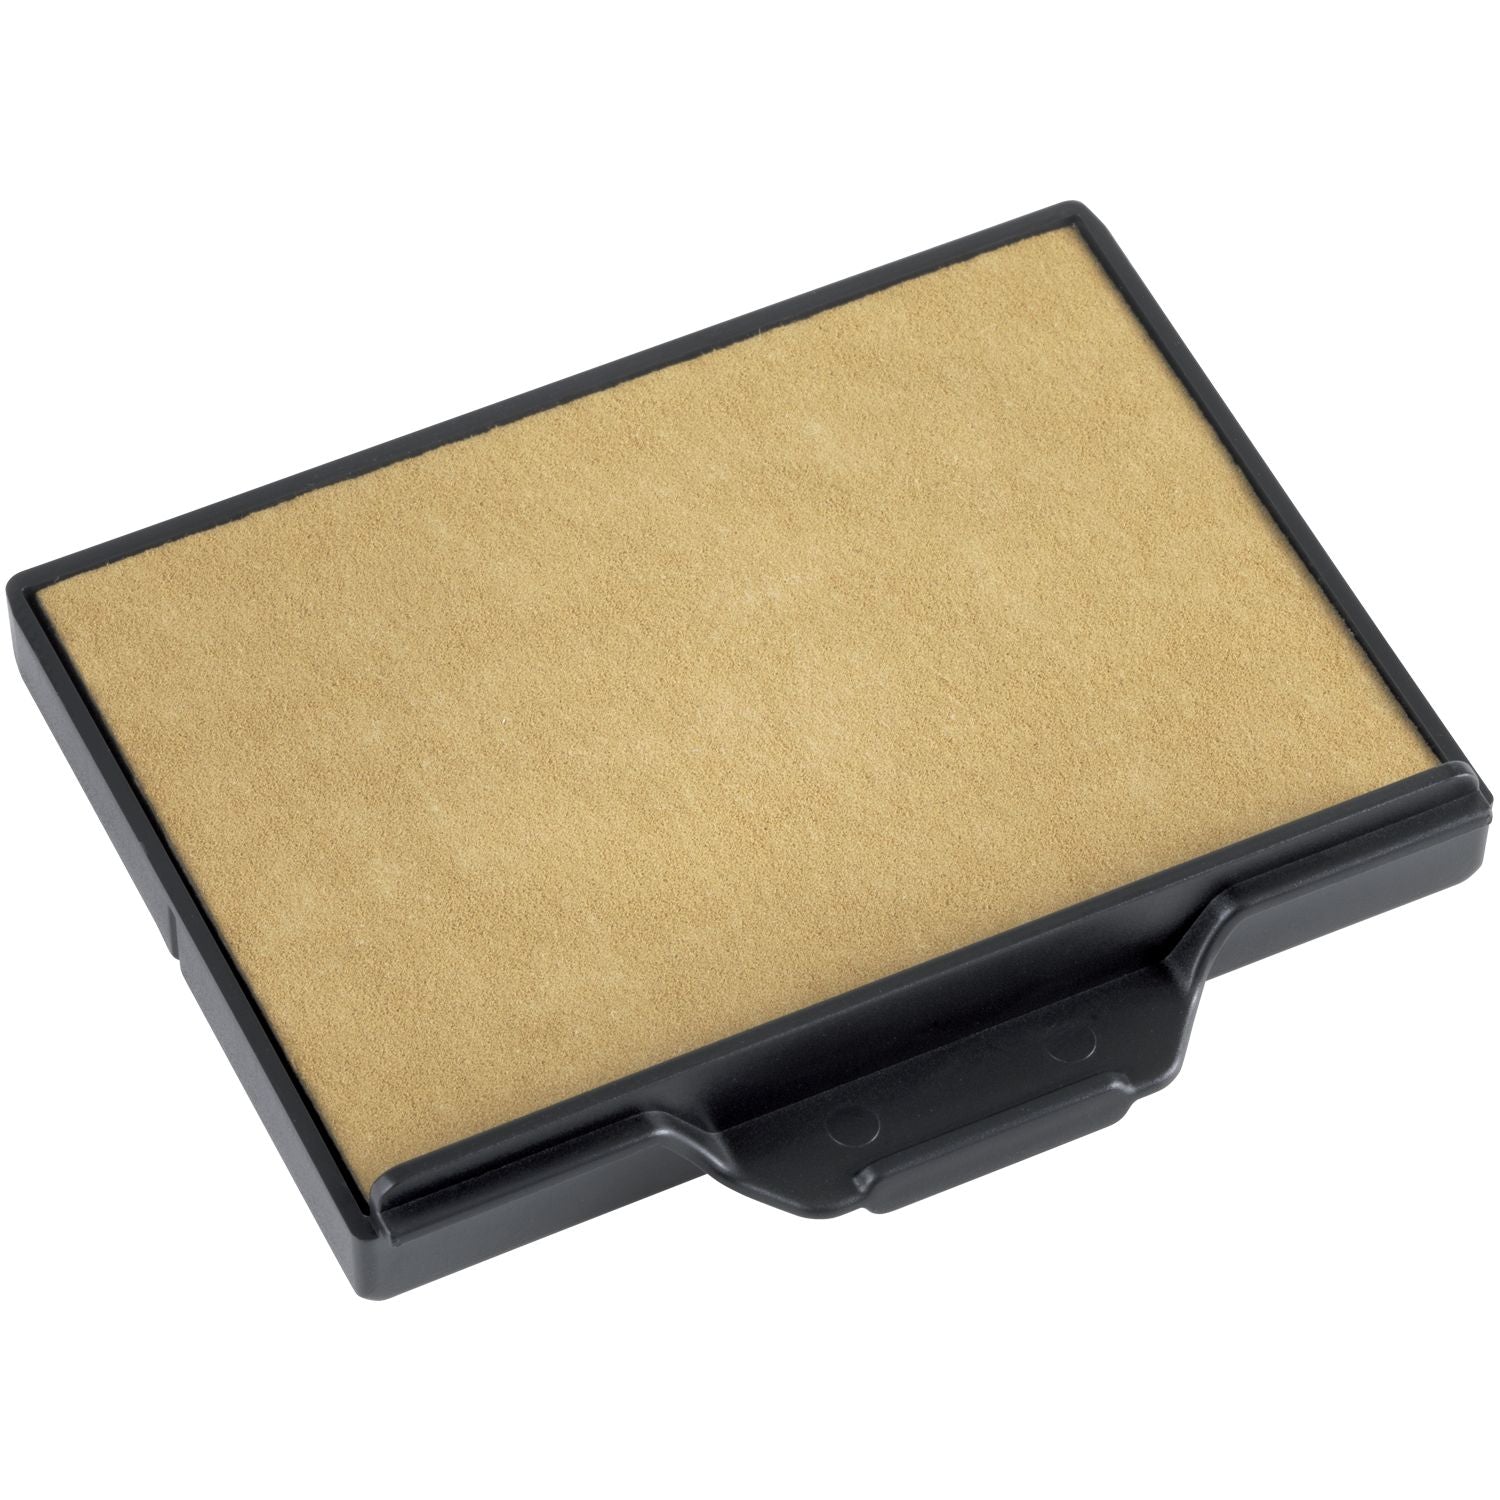 Two Color Replacement Ink Pad for 4828 Trodat Stamp